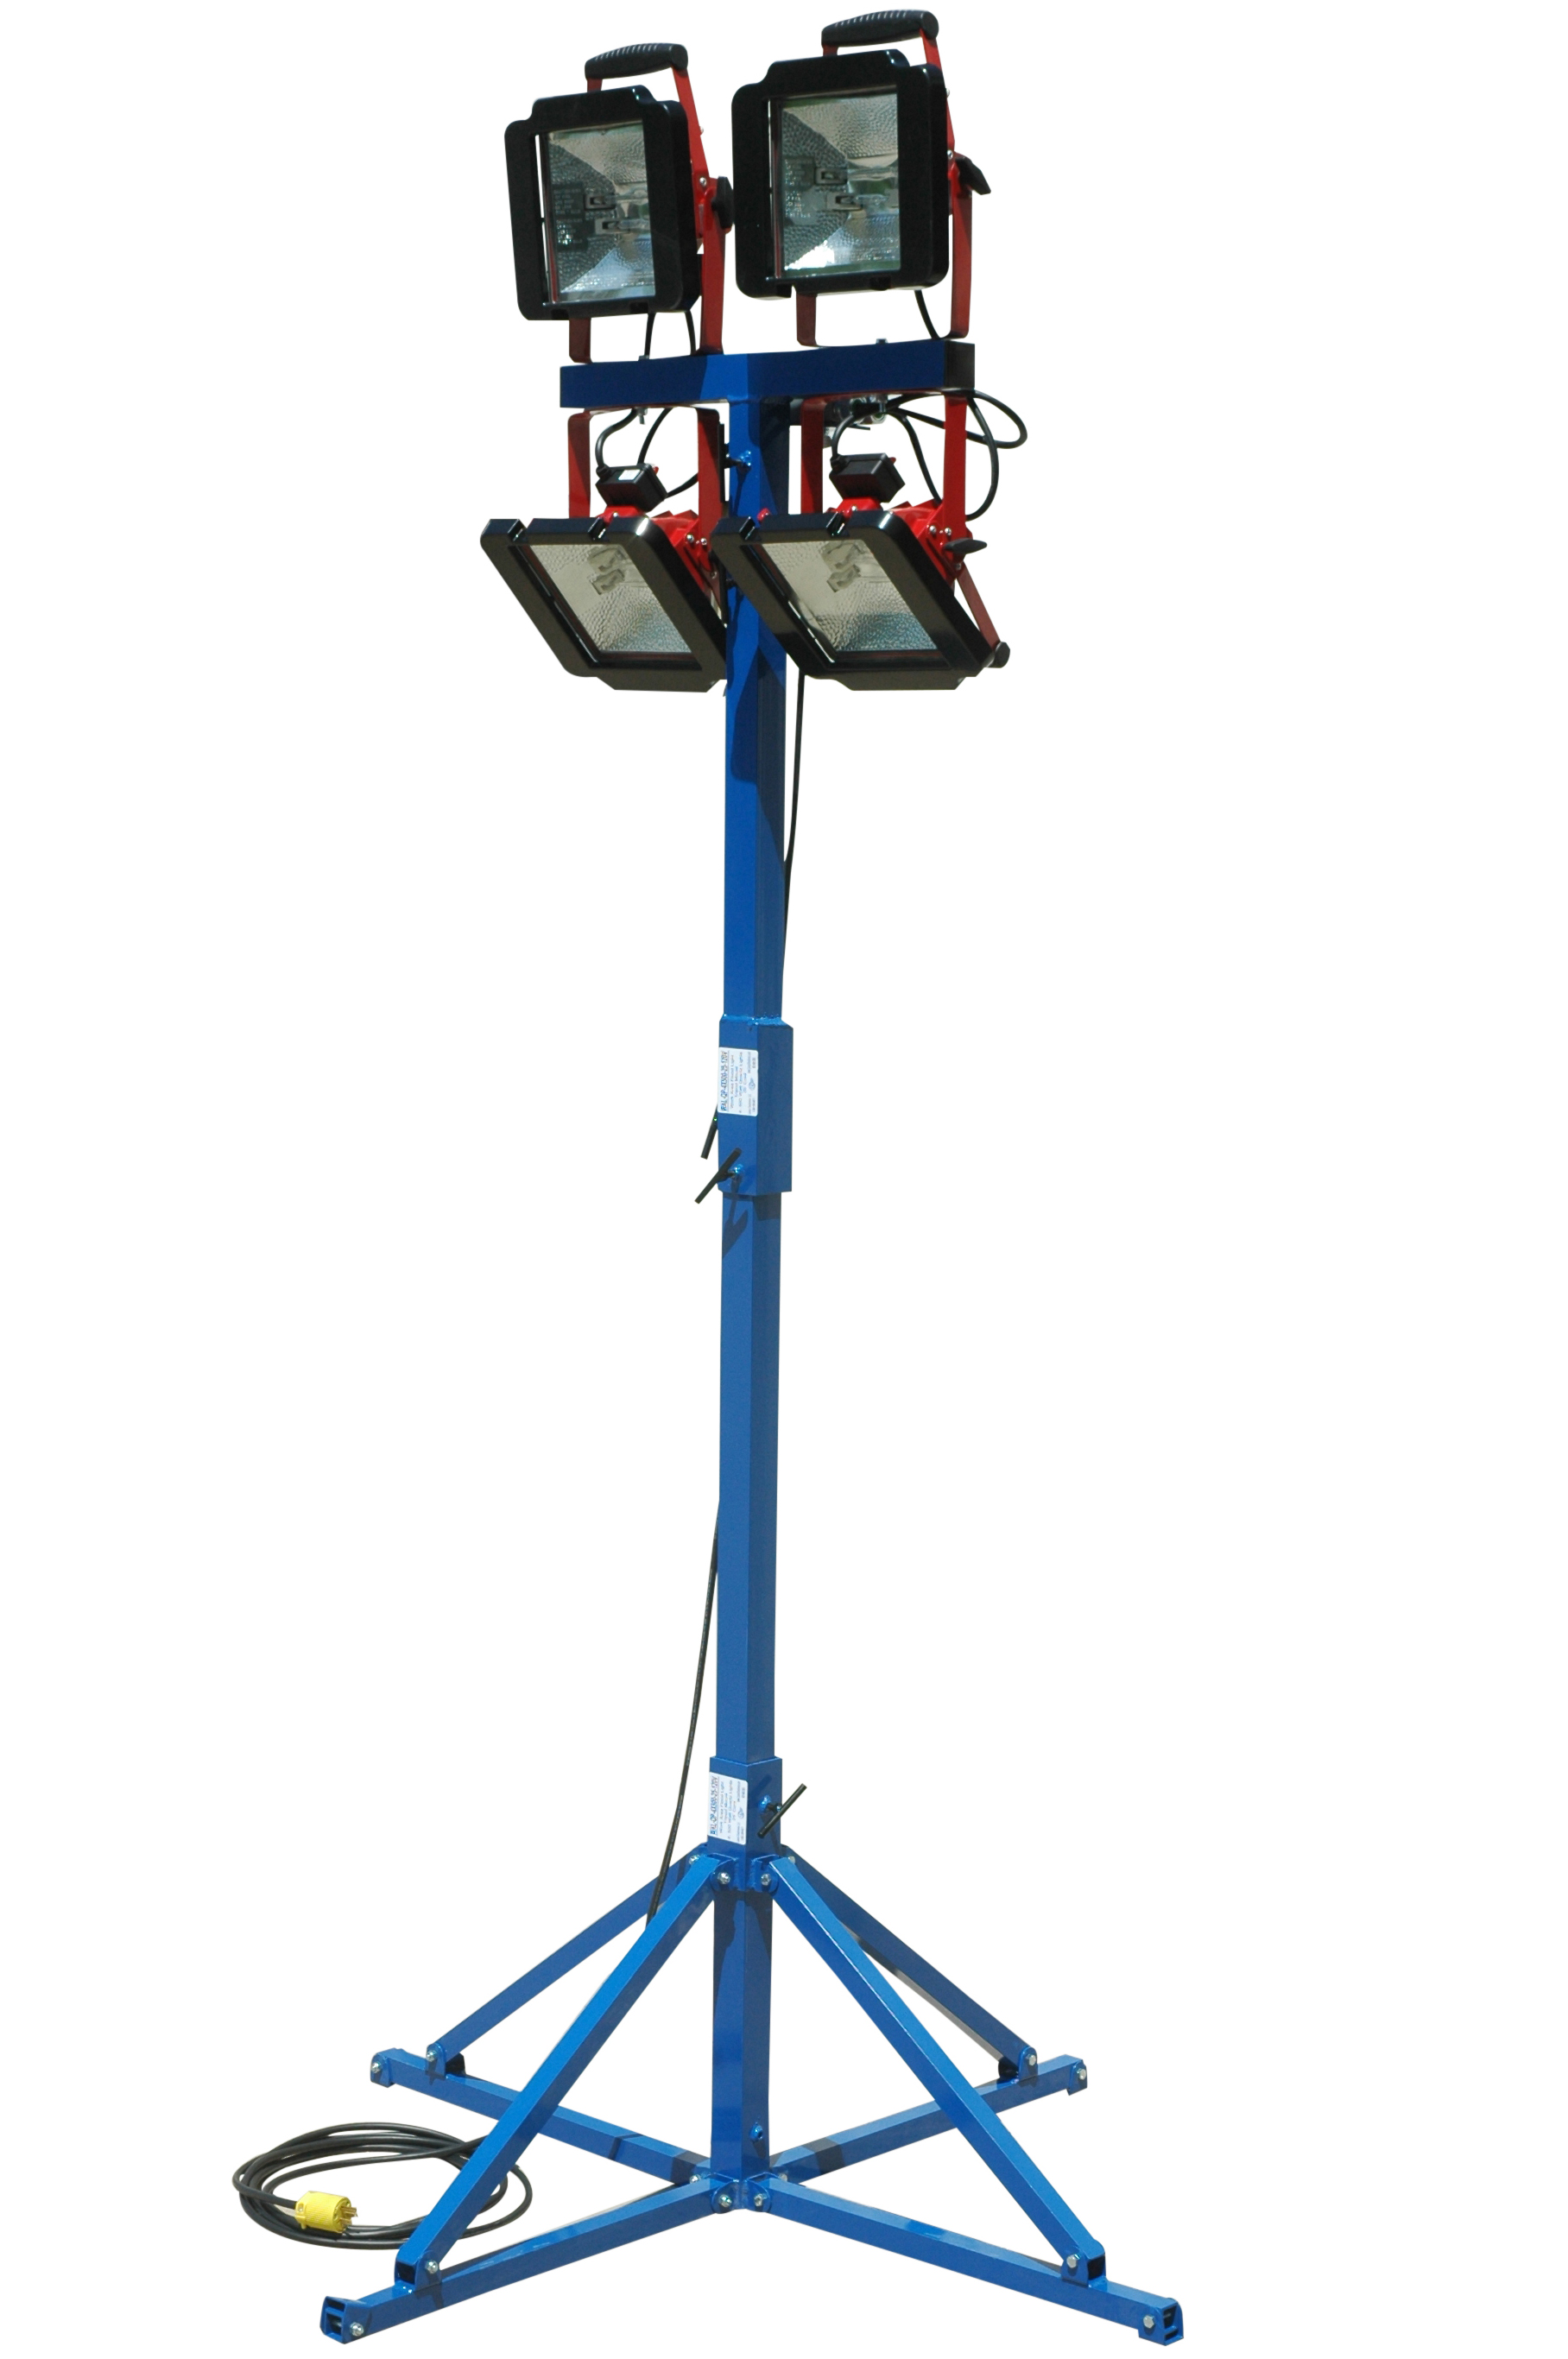 Portable Work Light capable of illuminating 14,500 square feet of work space